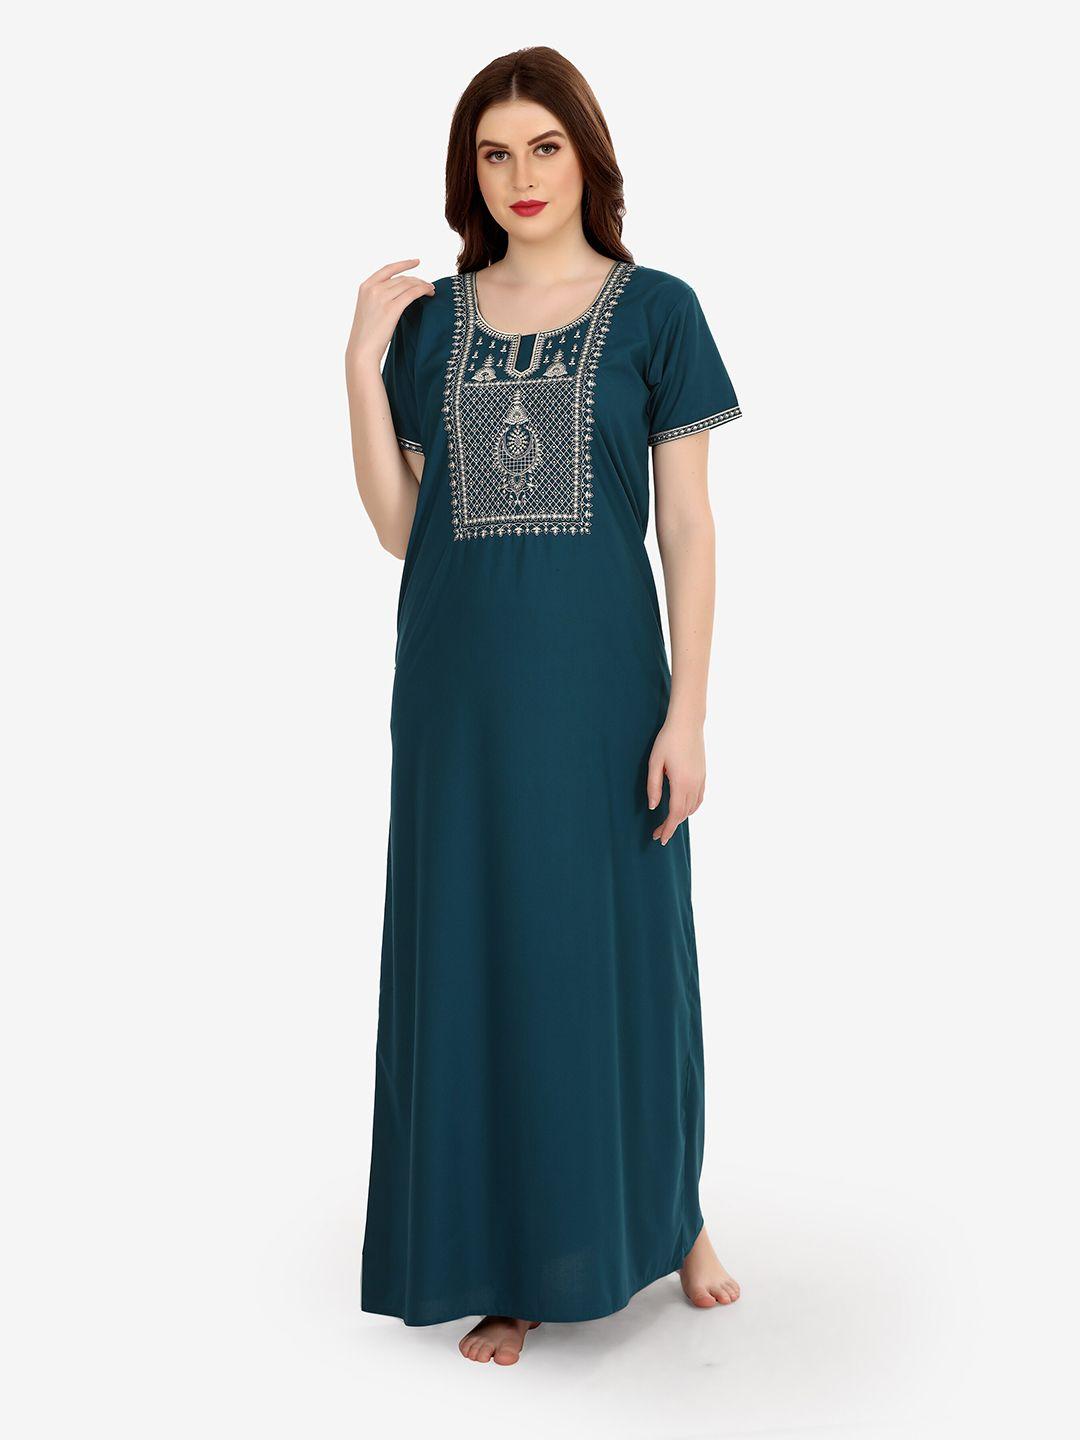 sand dune teal embroidered maxi nightdress